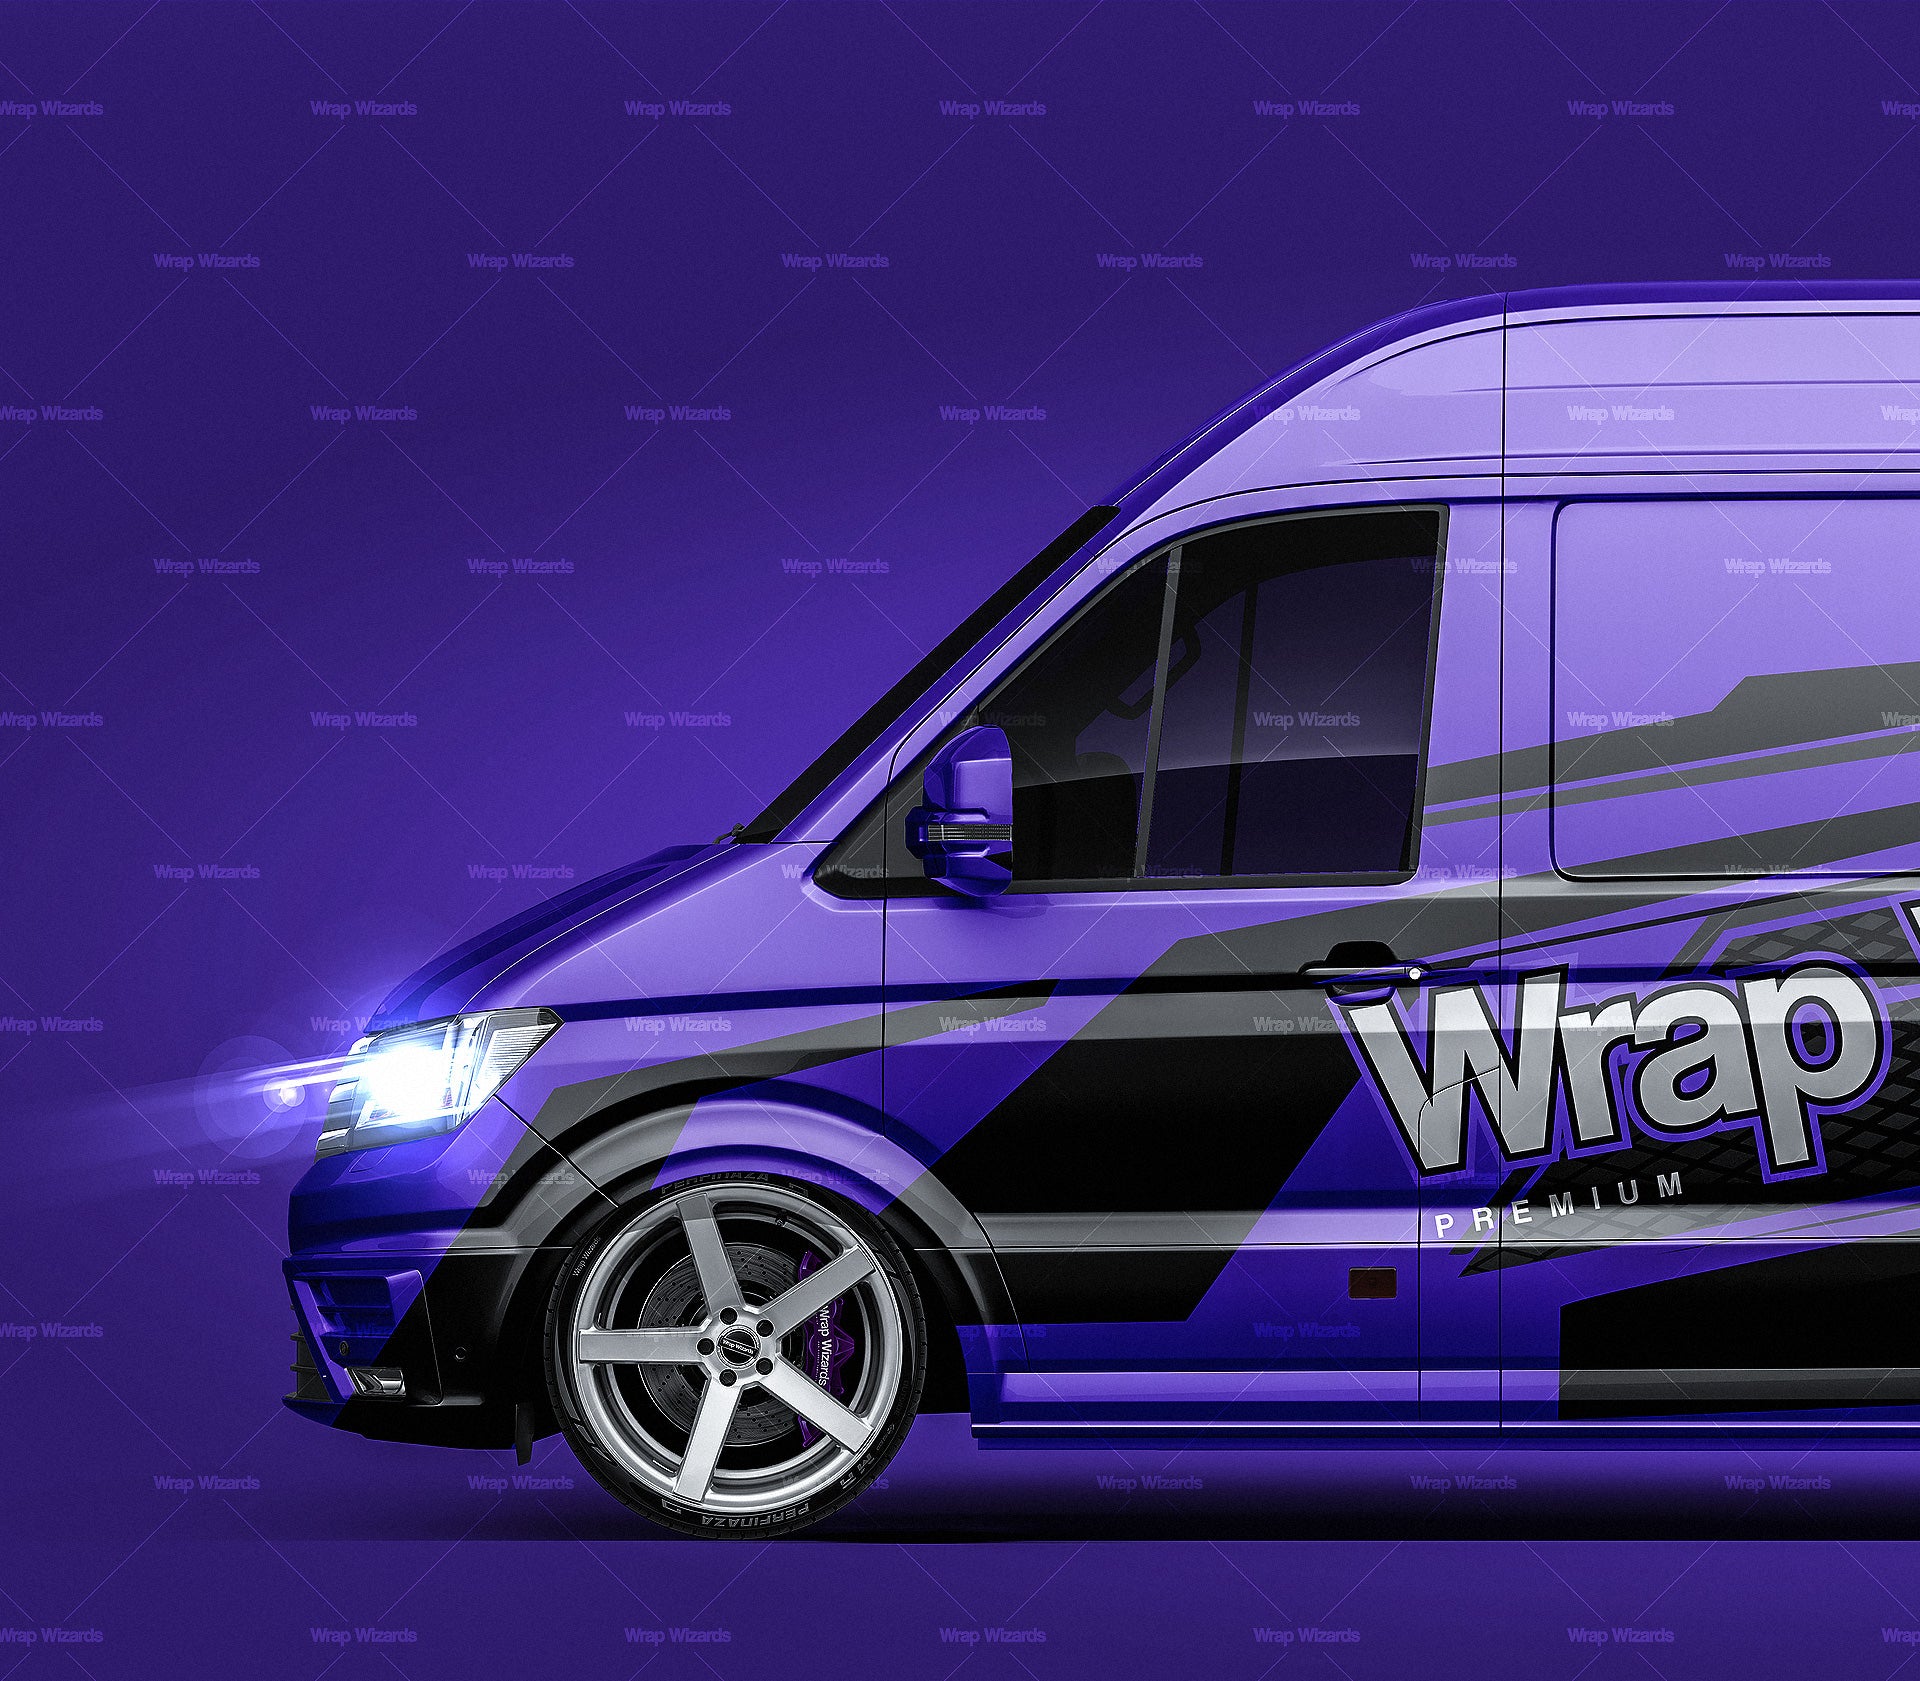 Volkswagen Crafter Long High Roof L2H2 2019 glossy finish - all sides Car Mockup Template.psd